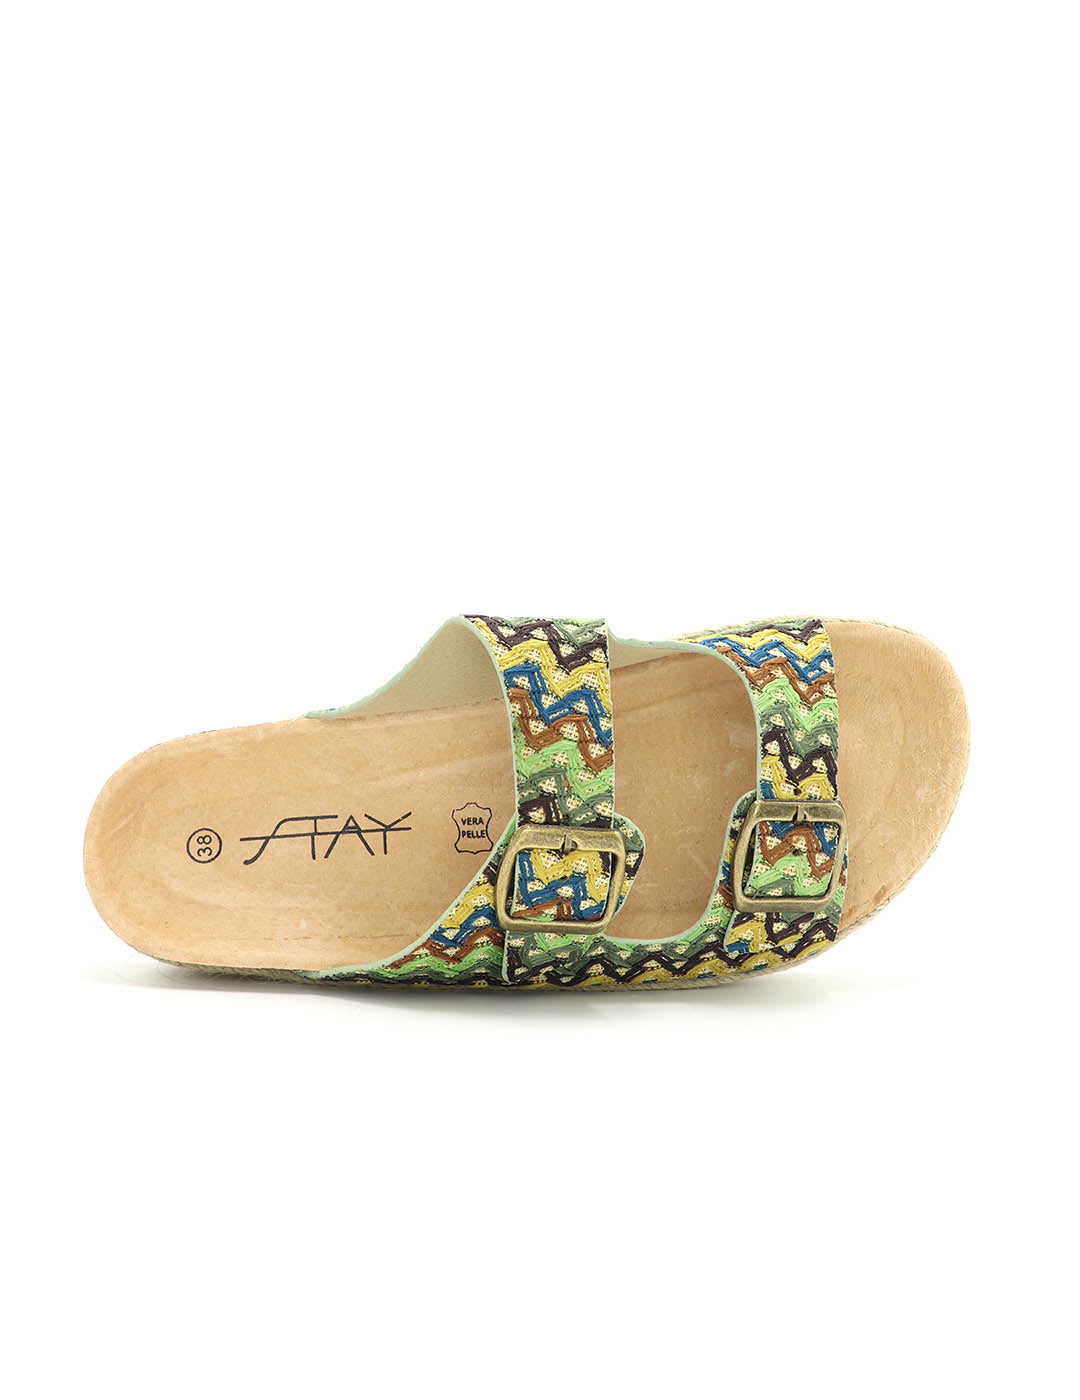 Zueco Pala STAY Mujer Multicolor Green